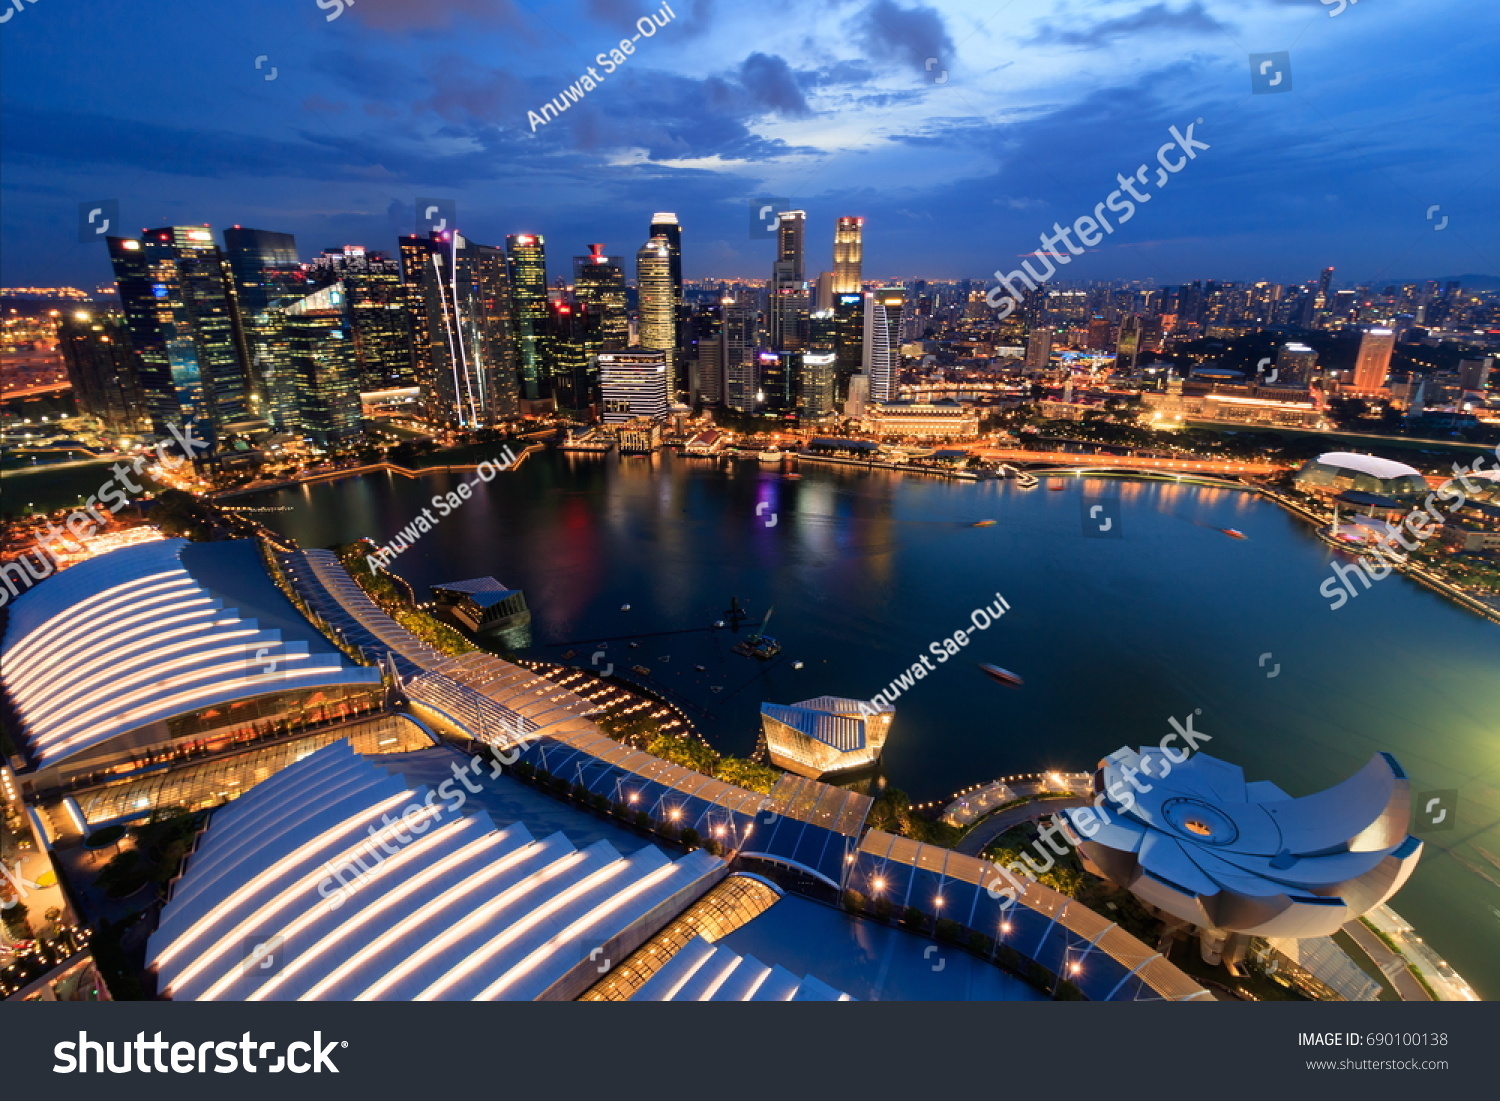 SINGAPORE - APRIL 14, 2017 : Singapore Marina Bay downtown night view from observation deck level 57 of Marina Bay sands hotel  #690100138